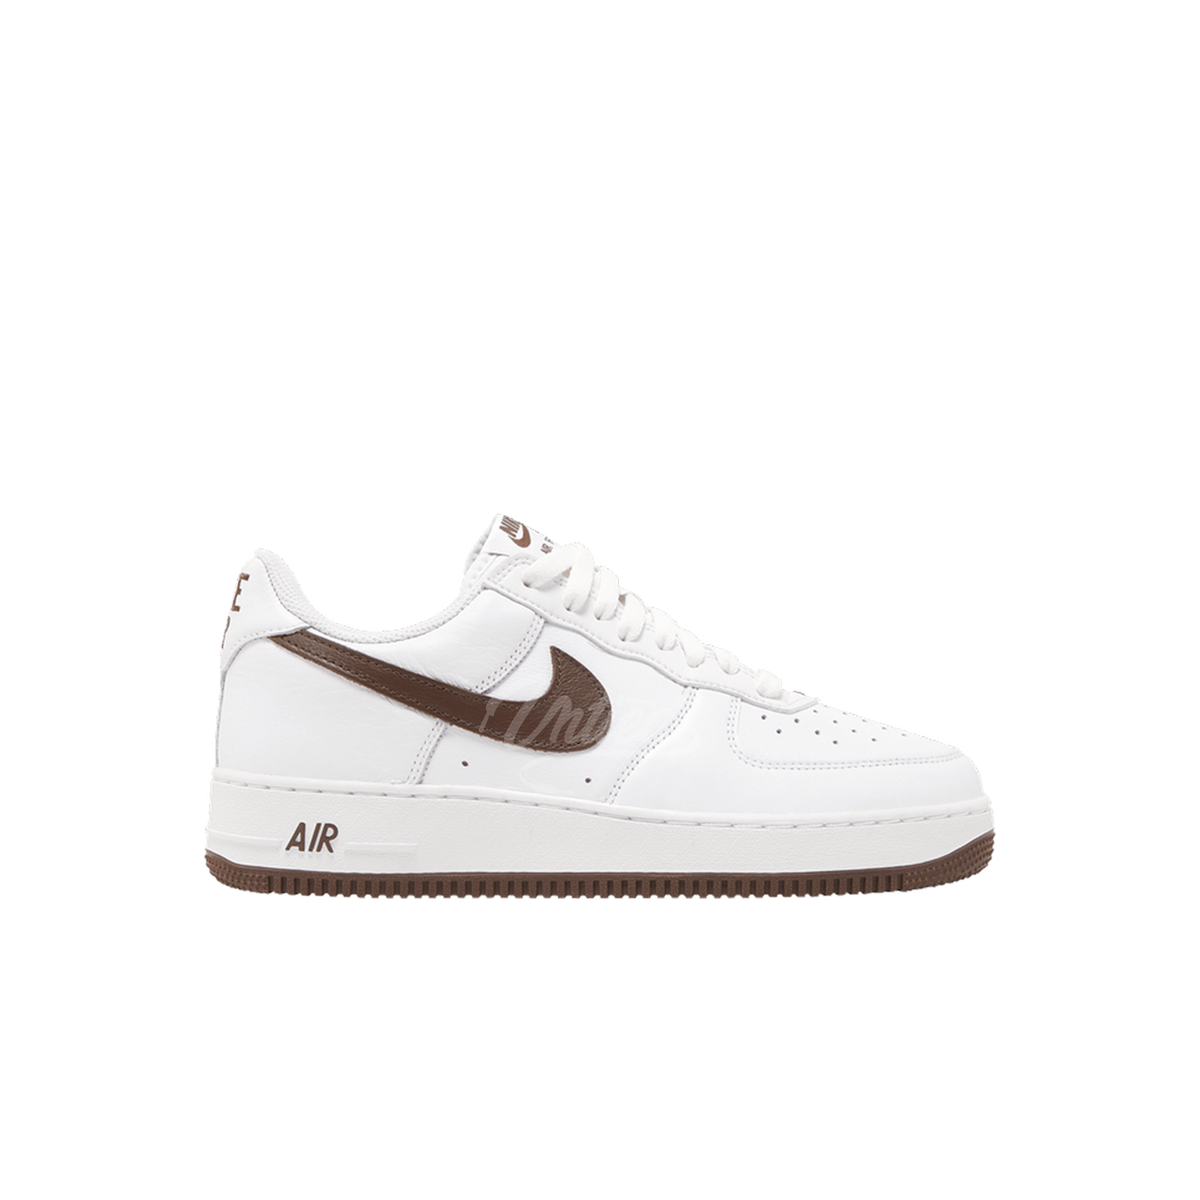 Air Force 1 Color of the Month "White Chocolate"